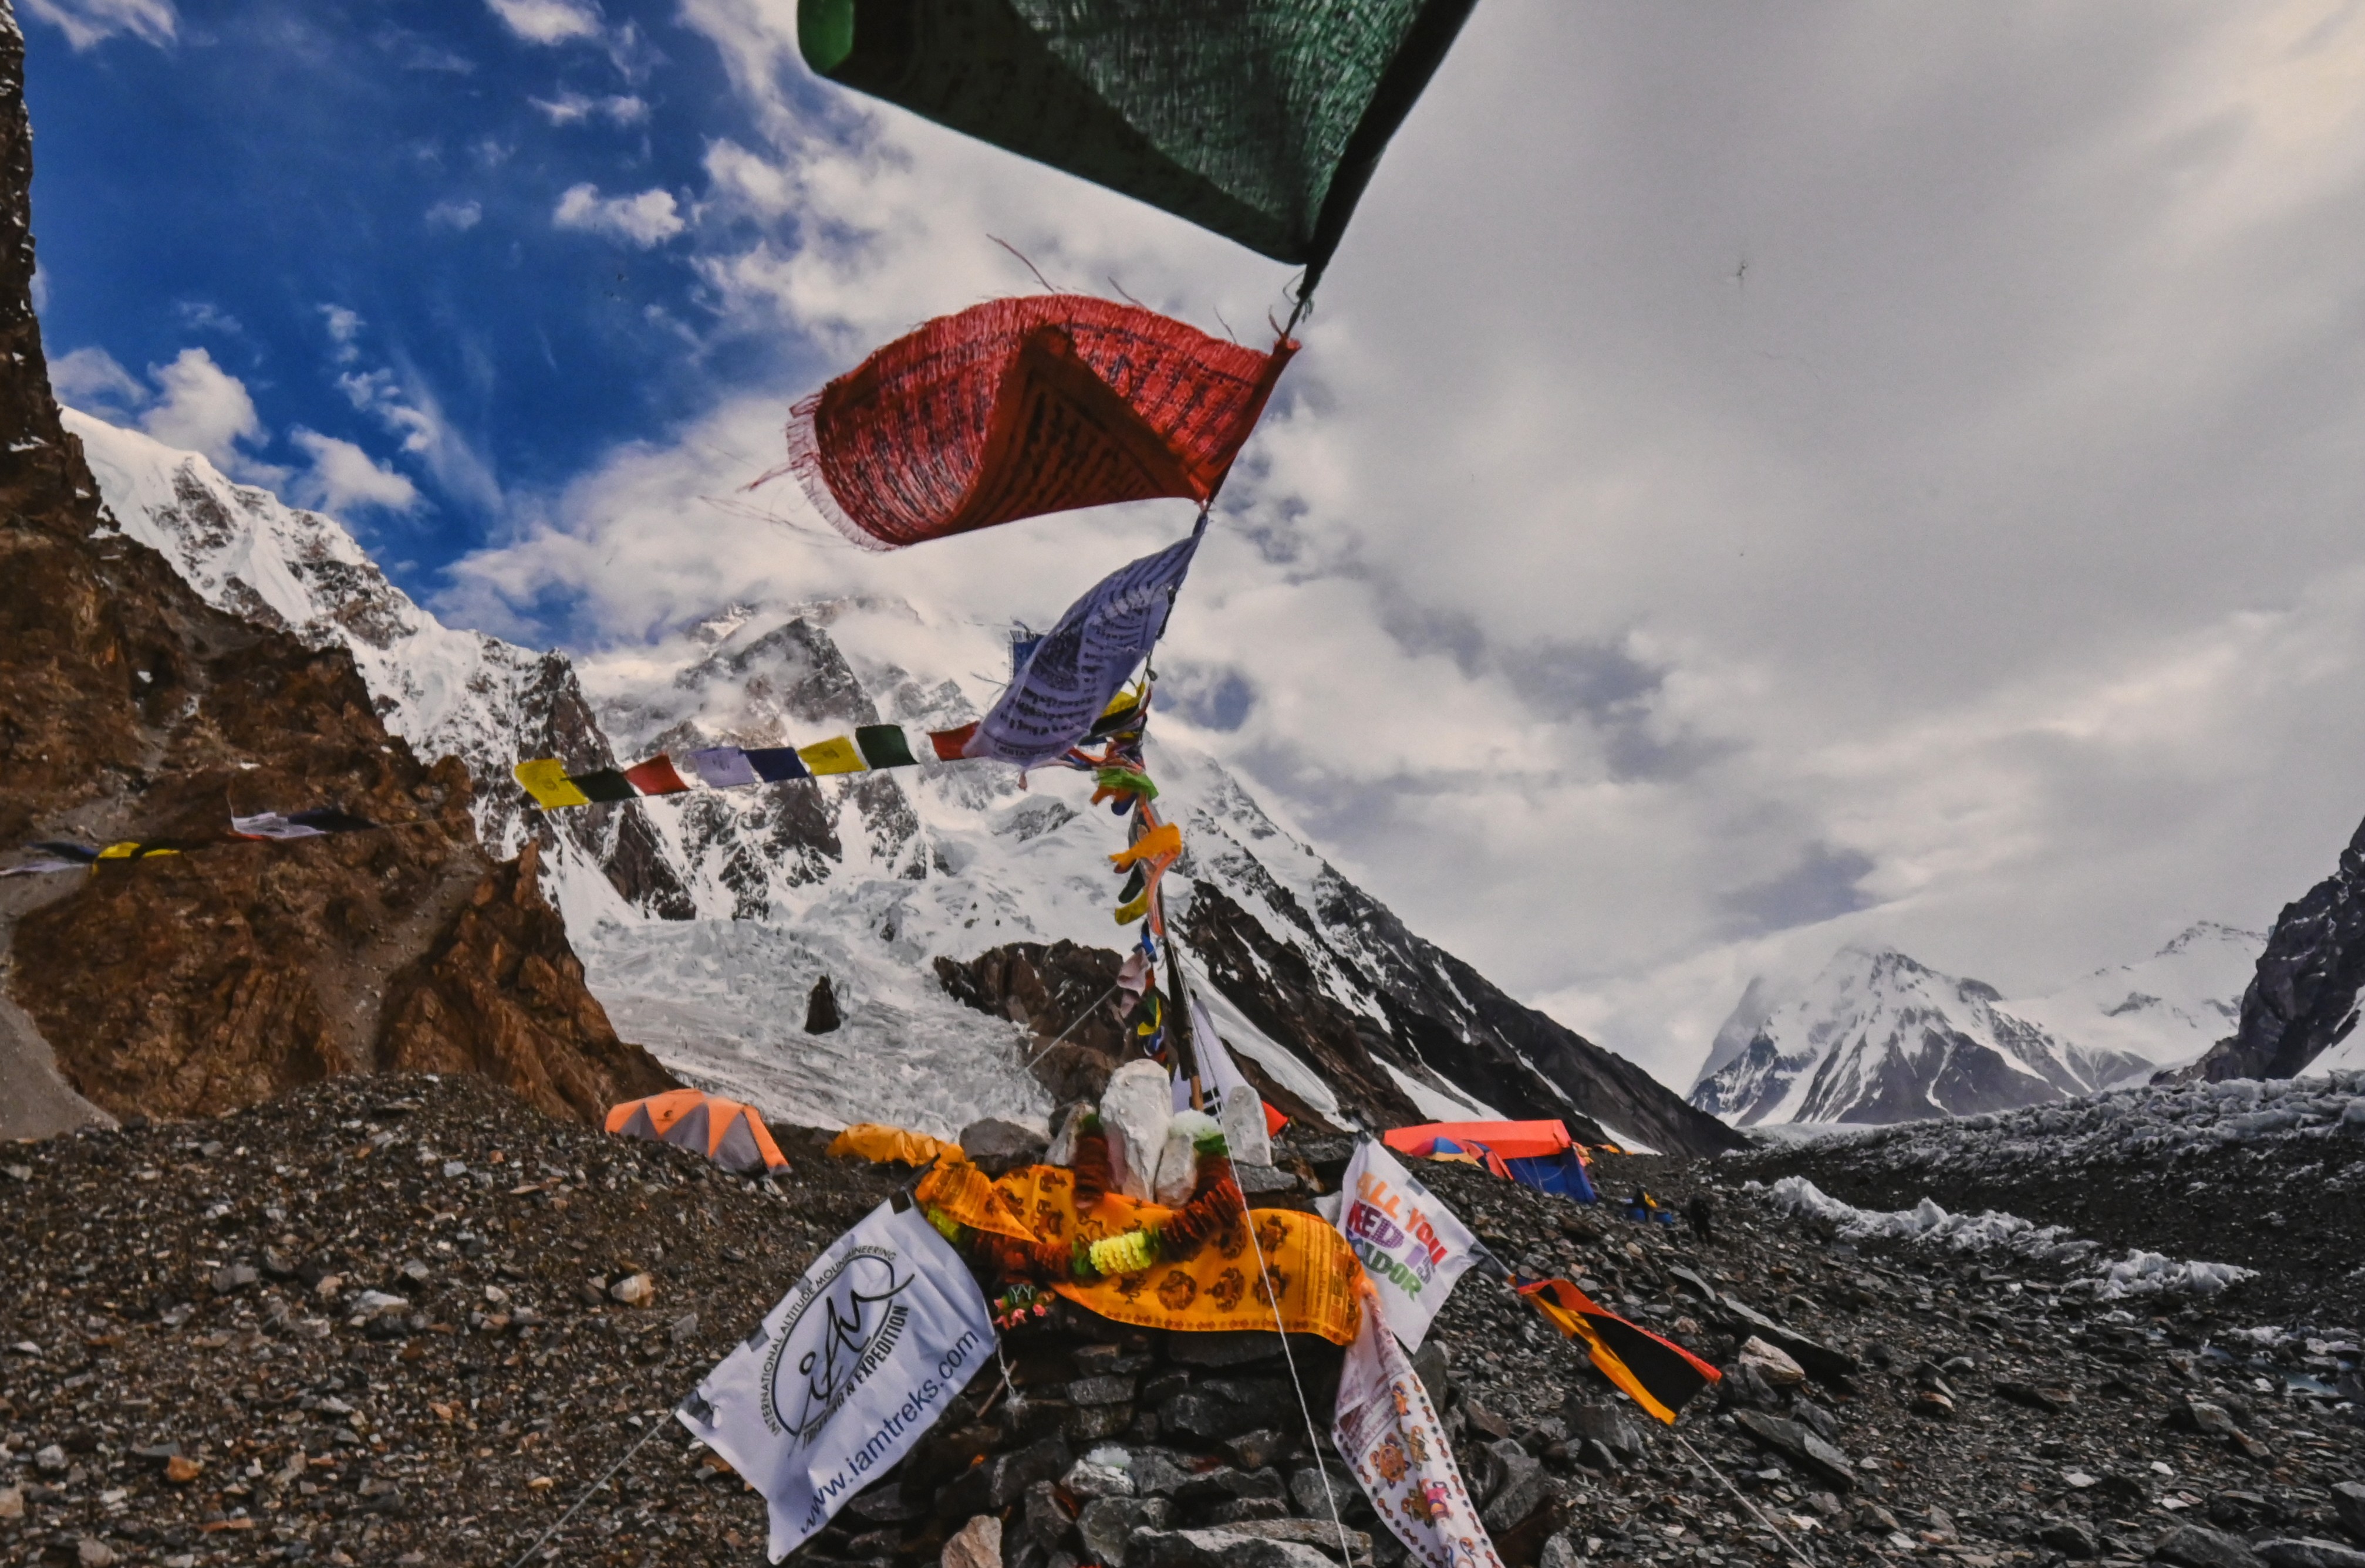 The prayer flags of various religious groups over the mountain